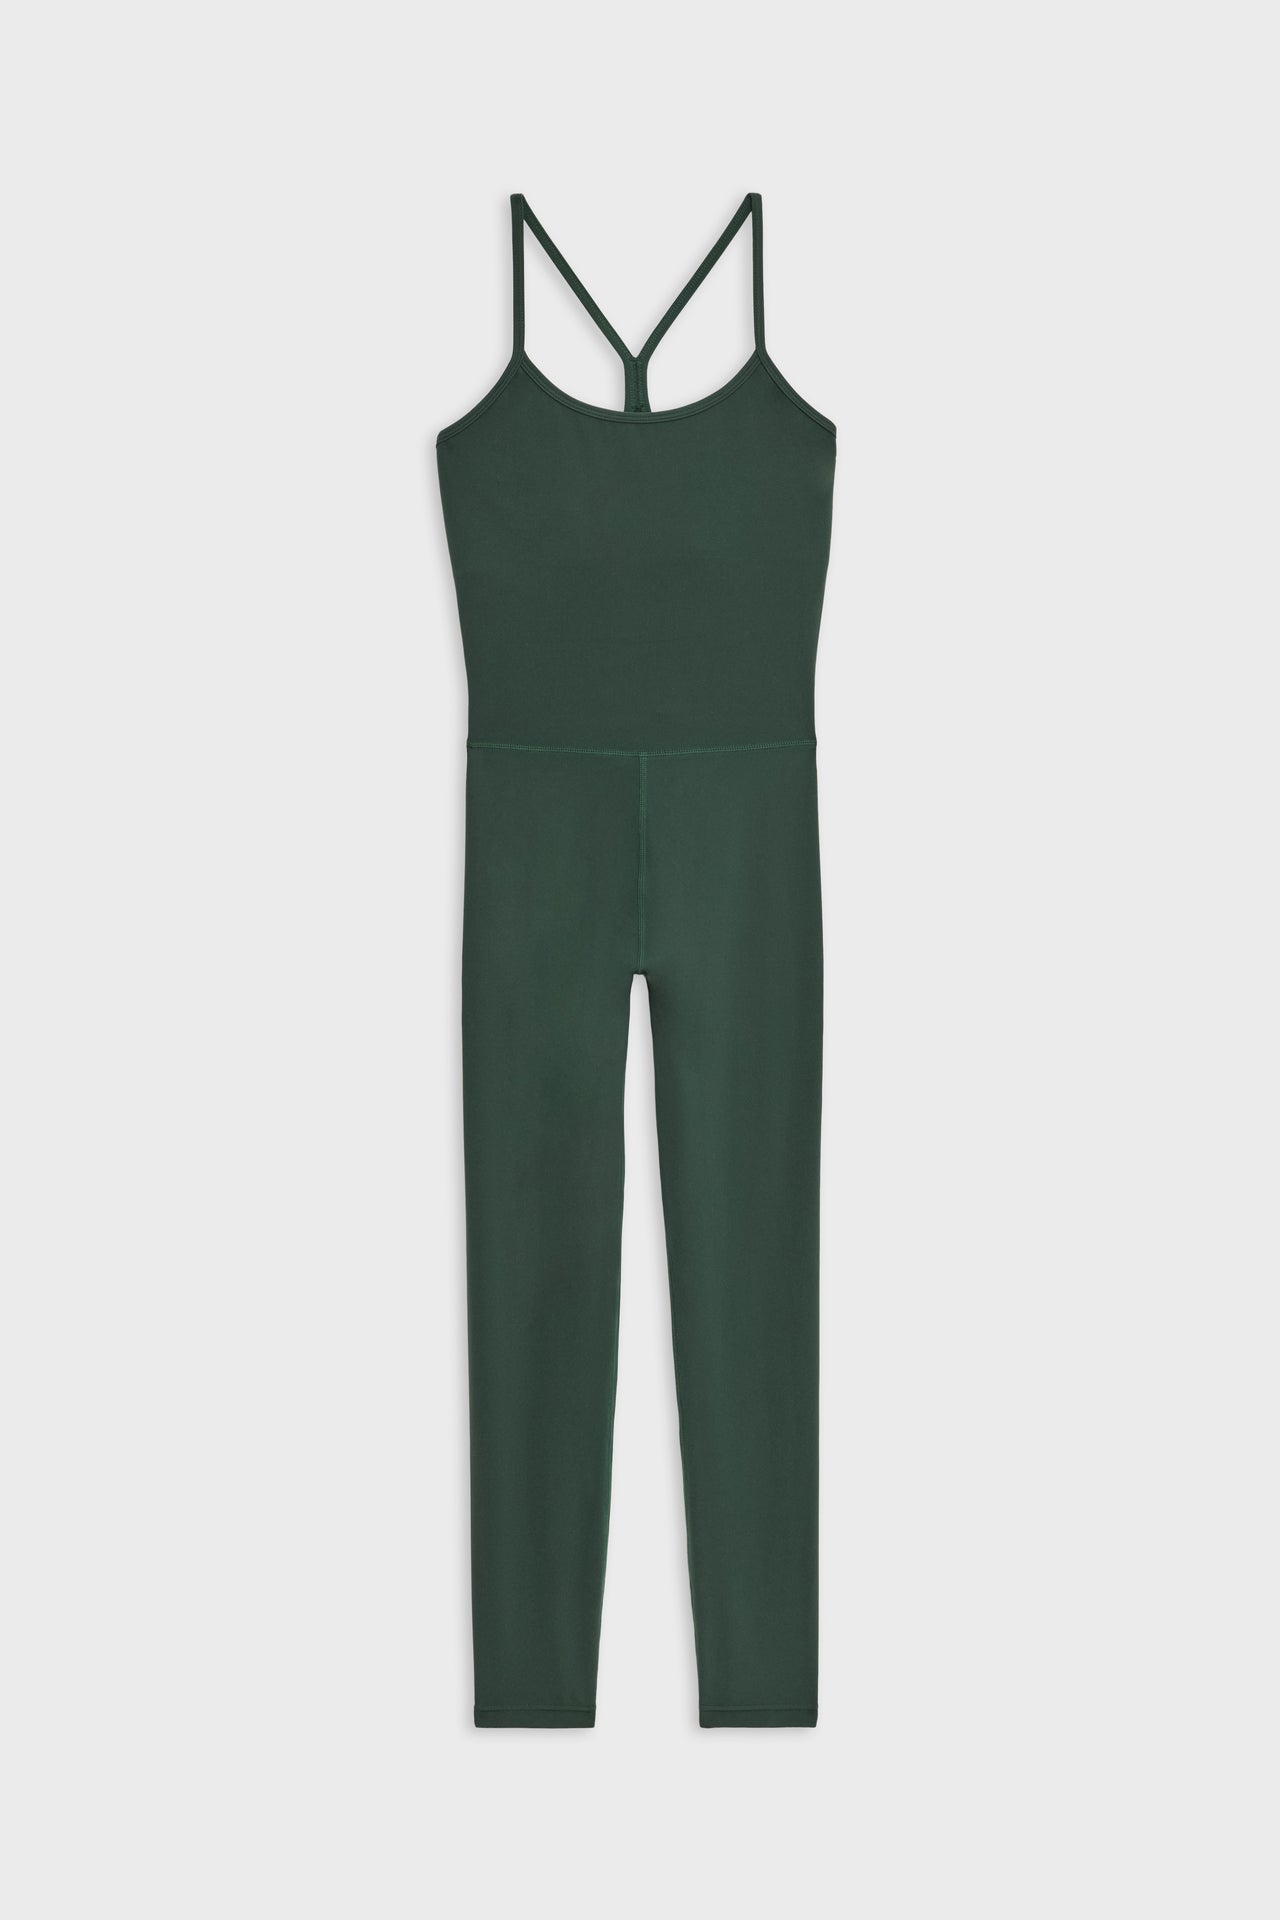 Flat  view of dark green one piece with leggings and spaghetti straps